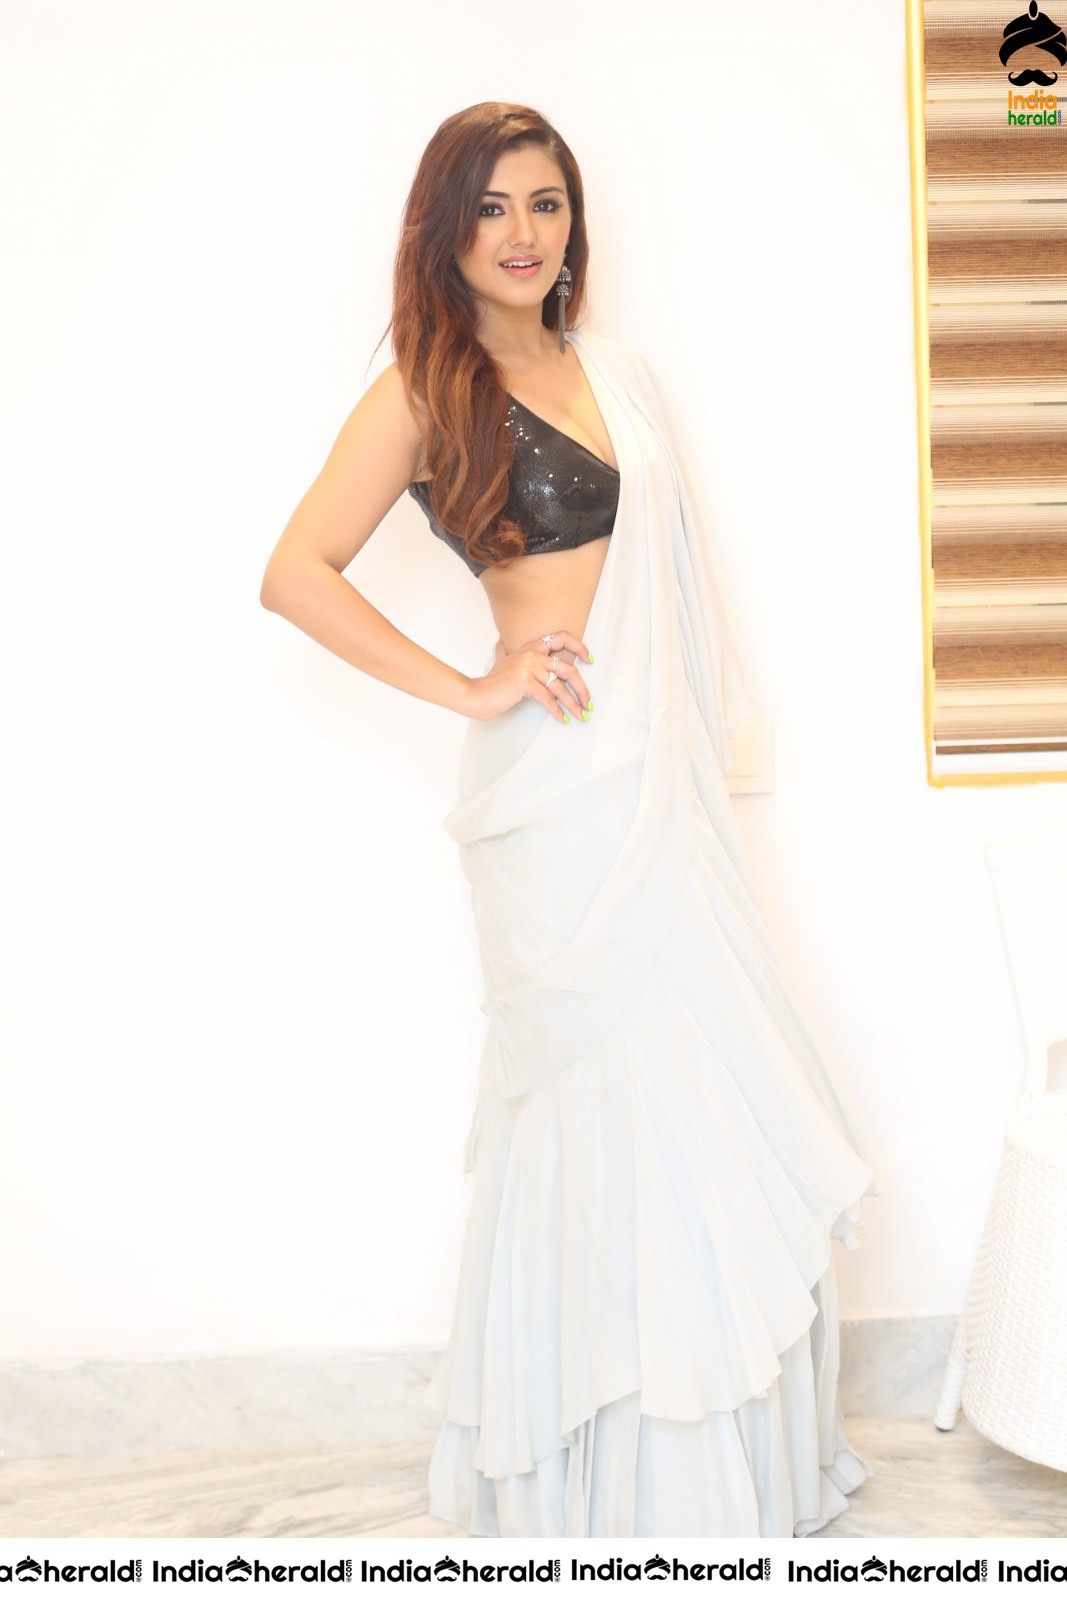 Malavika Sharma Looking Sexy and Angelic in White